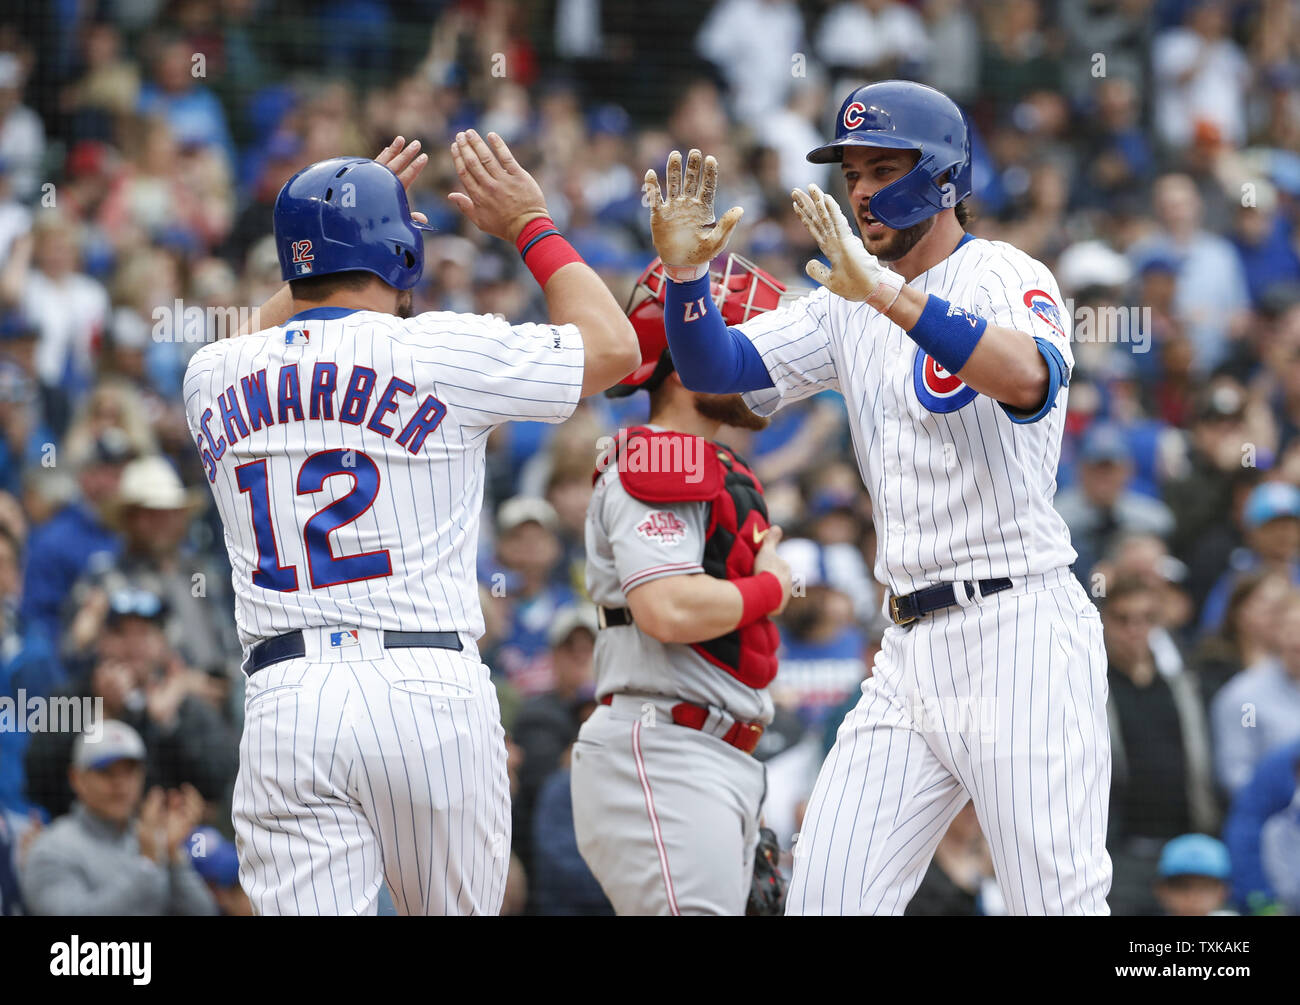 Chicago Cubs' Kris Bryant (R) celebrates with Kyle Schwarber (L) after hitting two-run home run against the Cincinnati Reds in the third inning at Wrigley Field on May 24, 2019 in Chicago. Photo by Kamil Krzaczynski/UPI Stock Photo